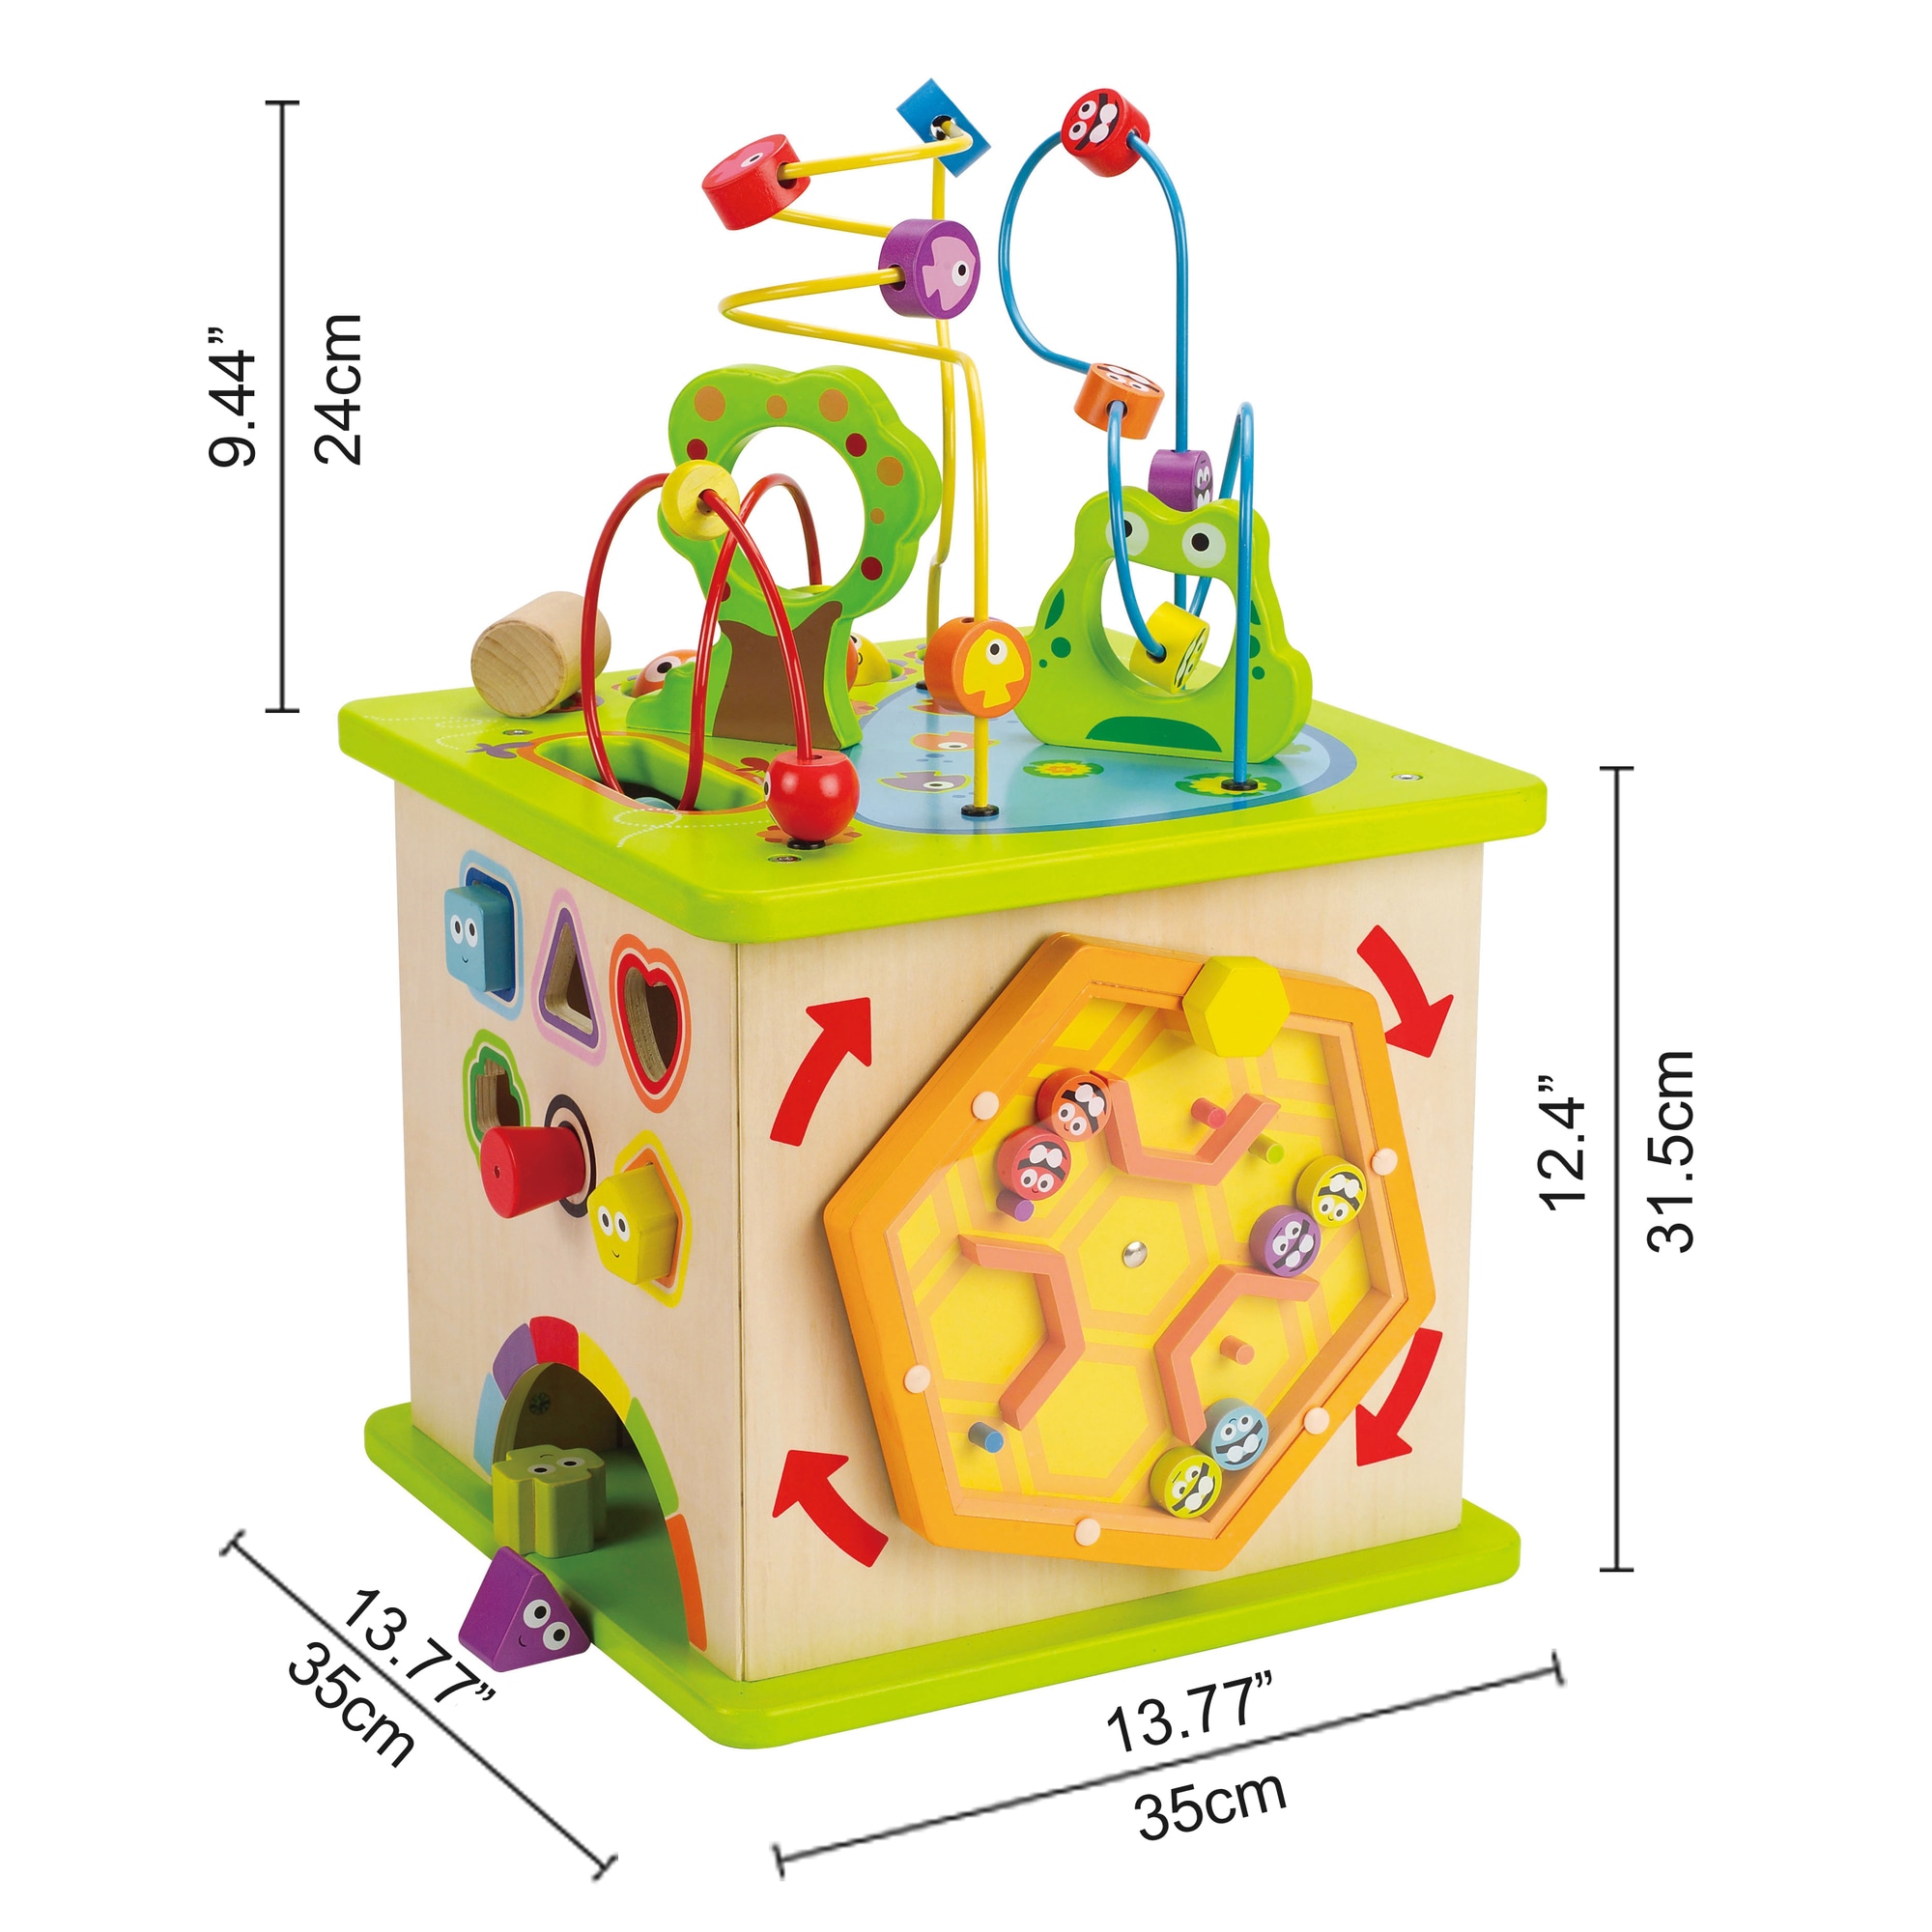 Hape Country Critters 5-Sided Wooden Play Cube for Toddlers, Ages 12 mo+ - image 3 of 8